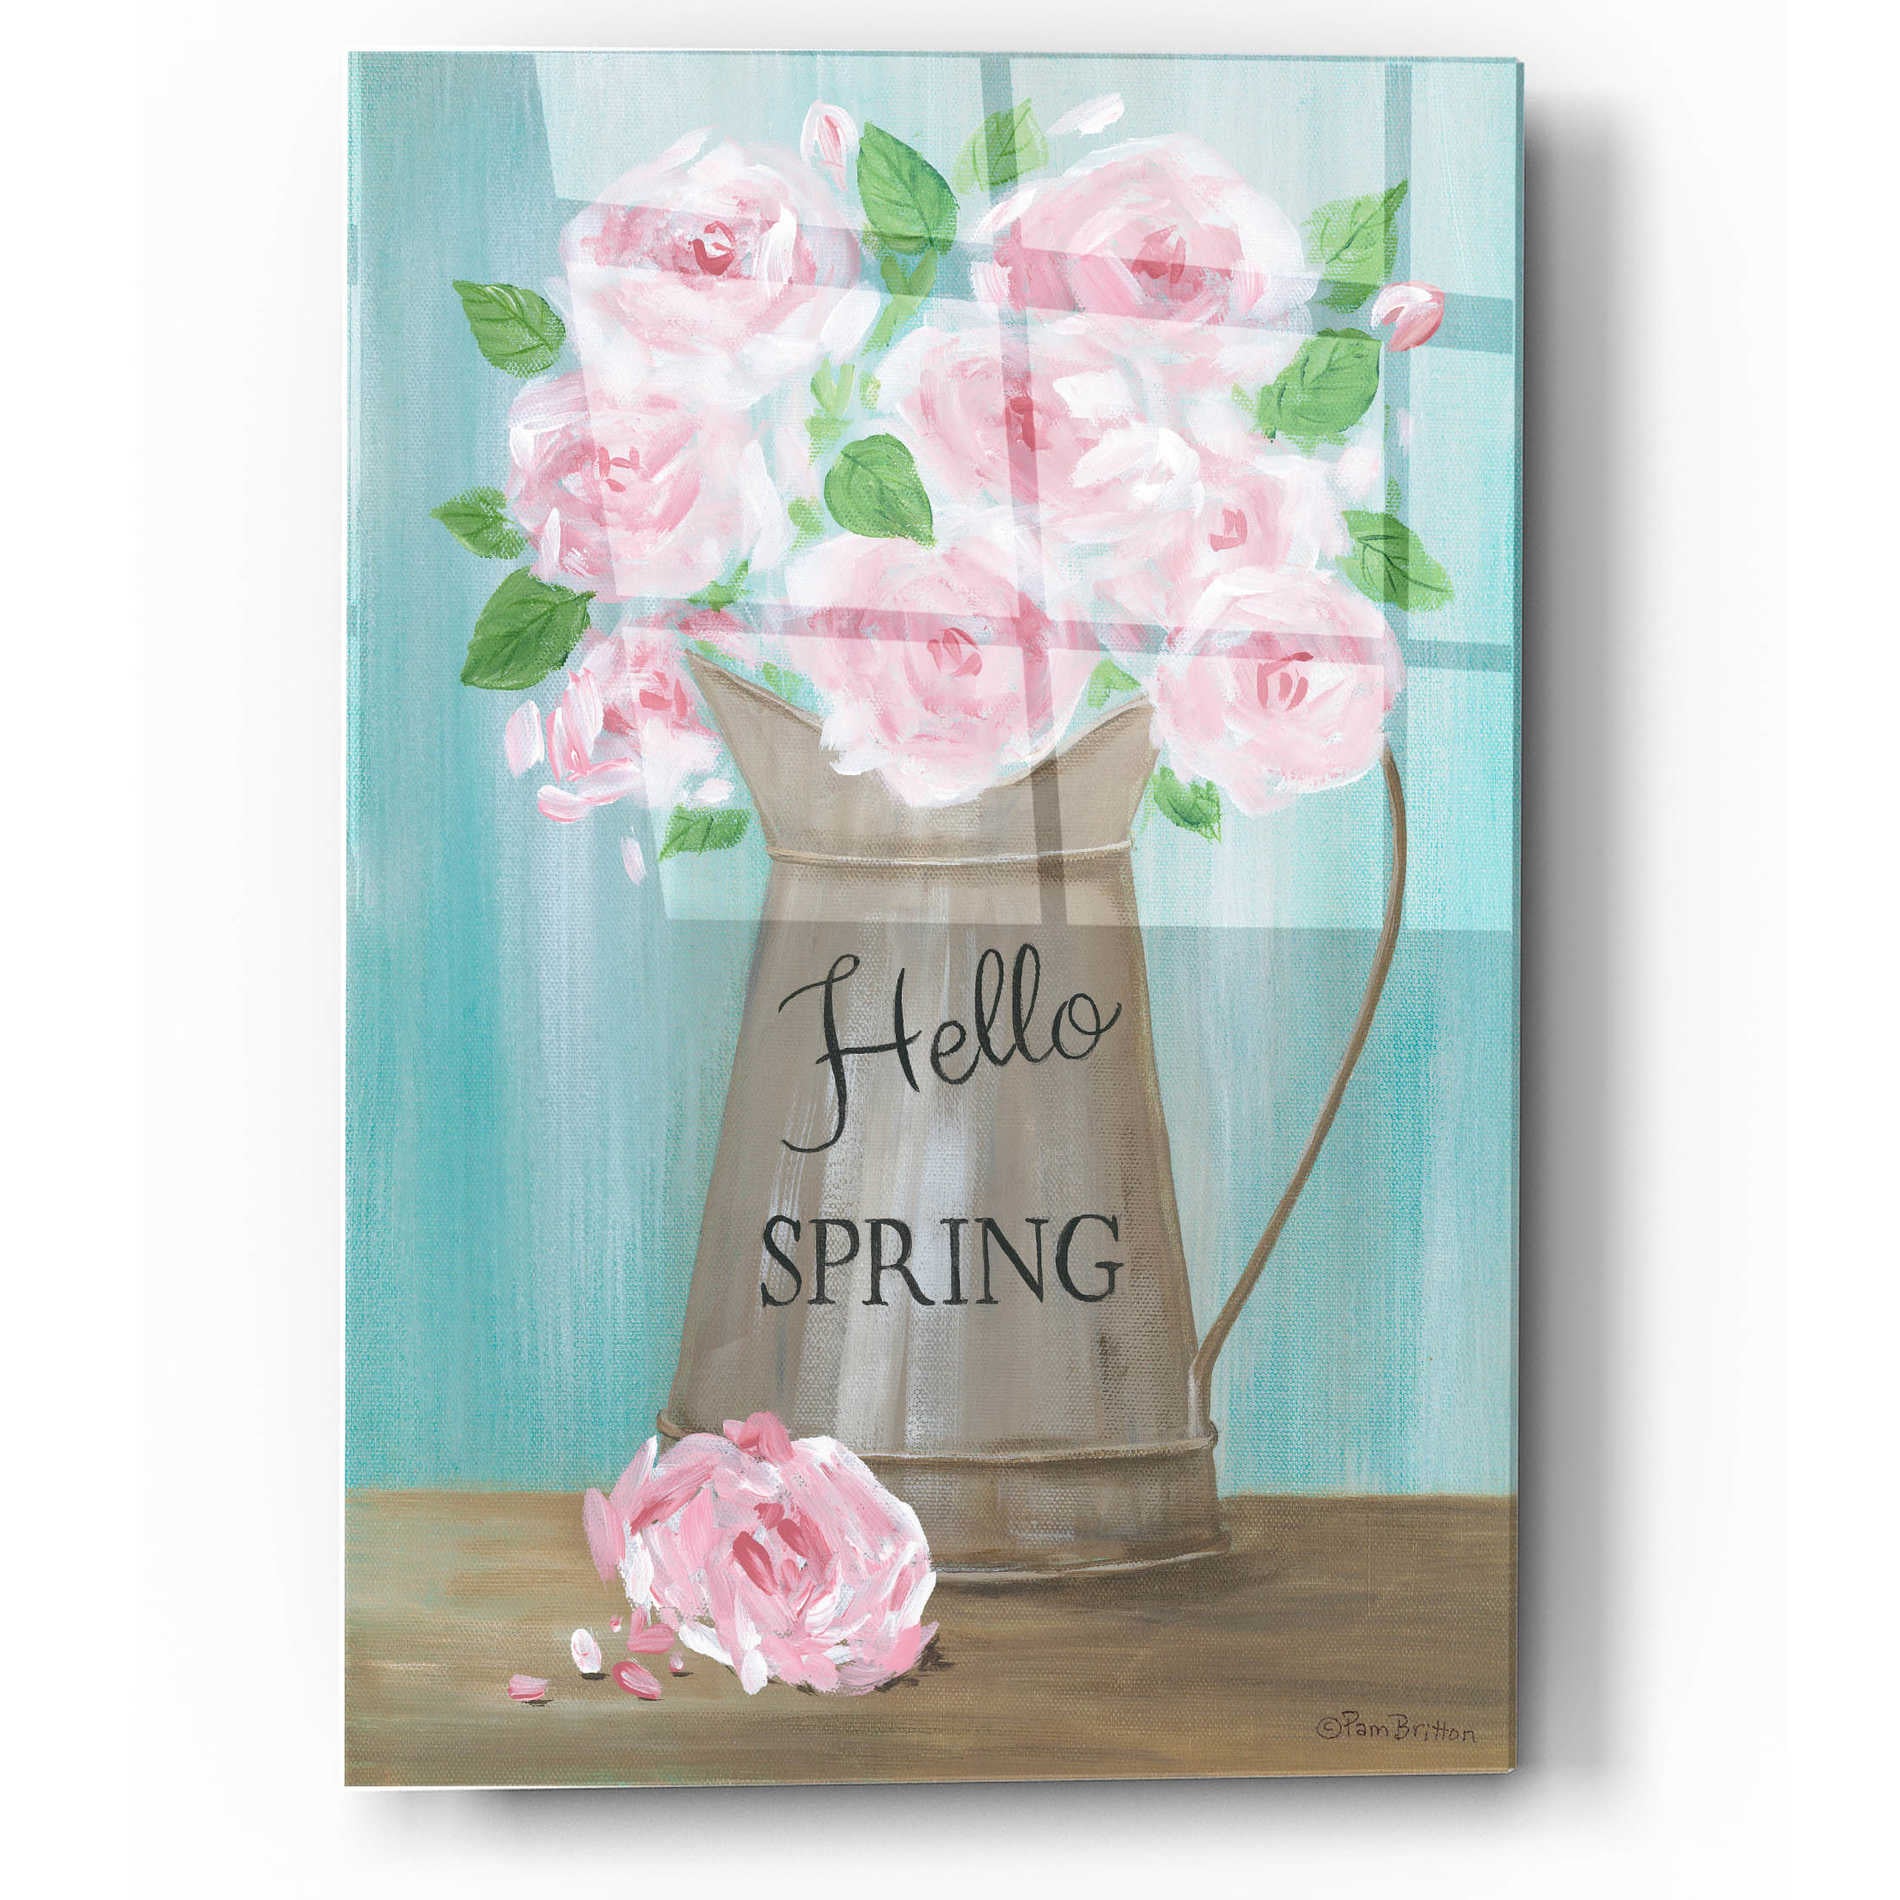 Epic Art 'Hello Spring Roses' by Pam Britton, Acrylic Glass Wall Art,12x16